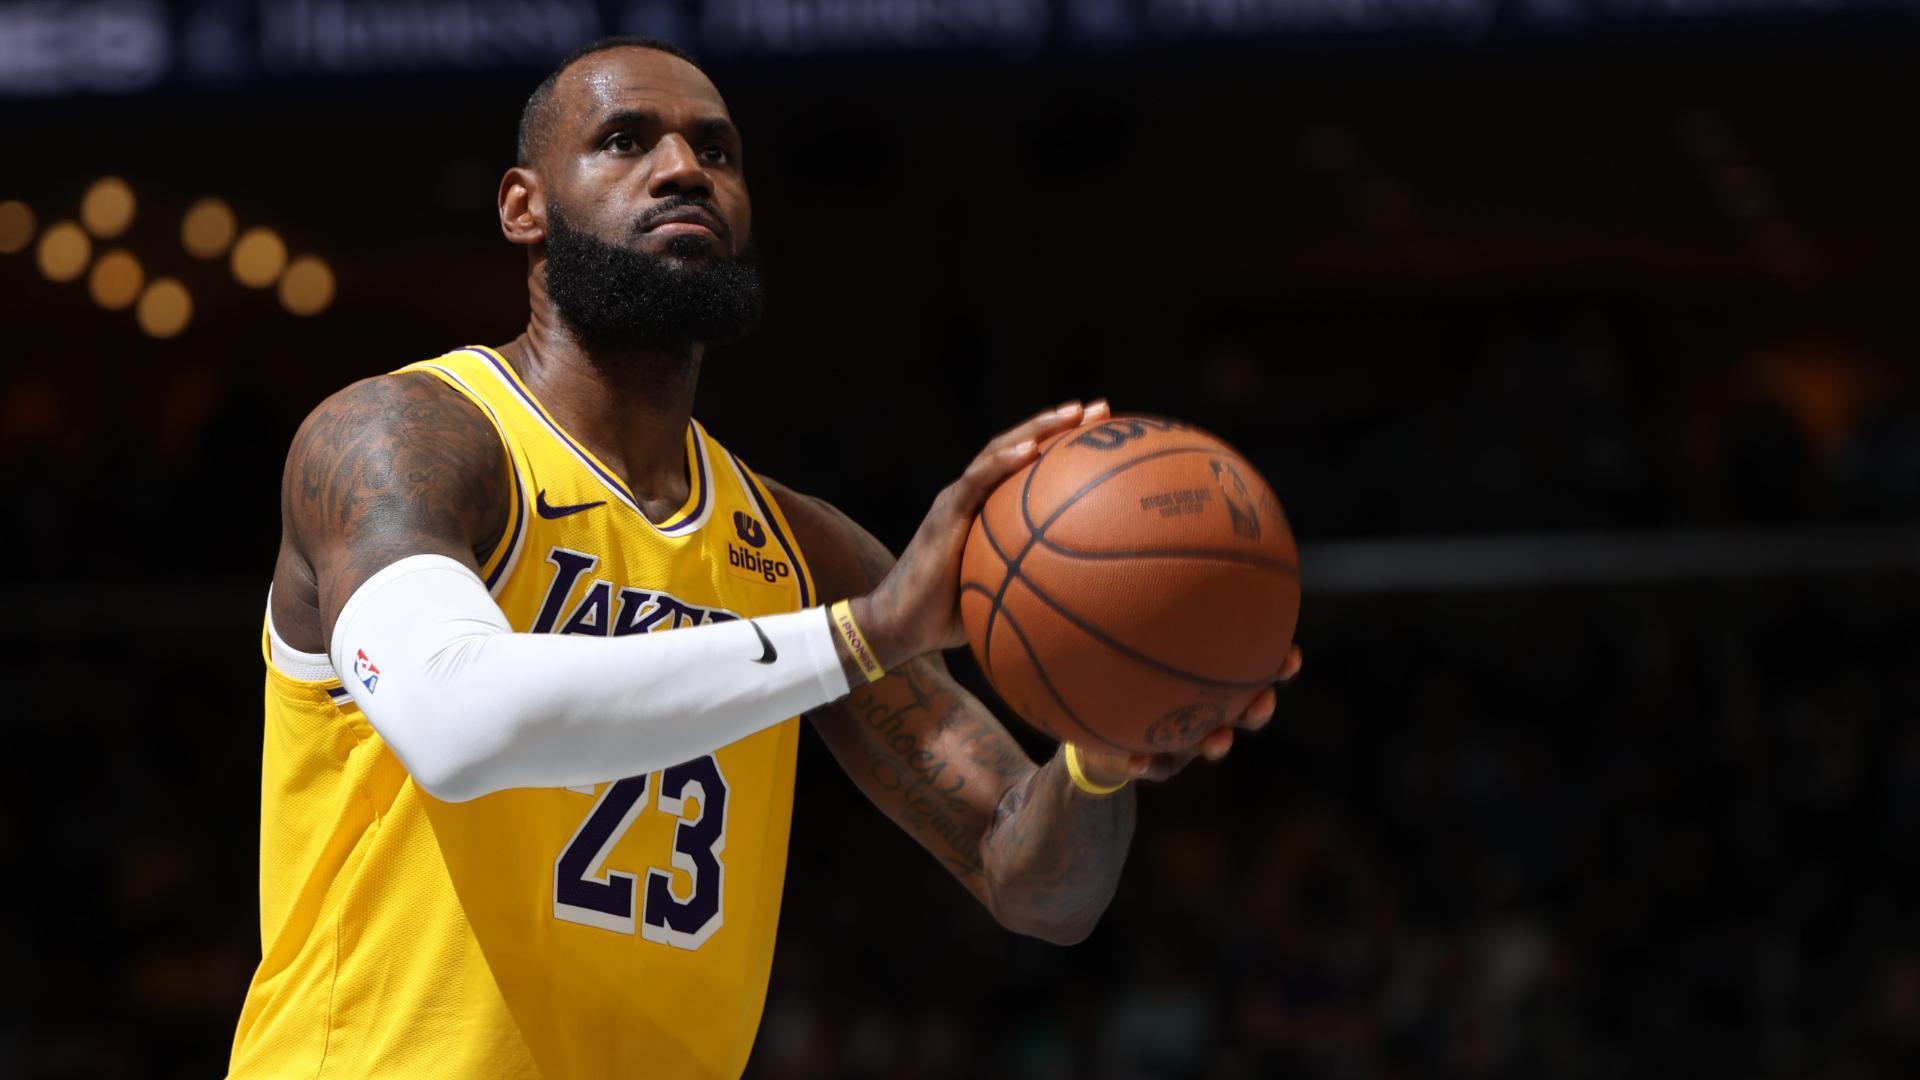 LeBron records triple-double in Lakers' win vs. Grizzlies